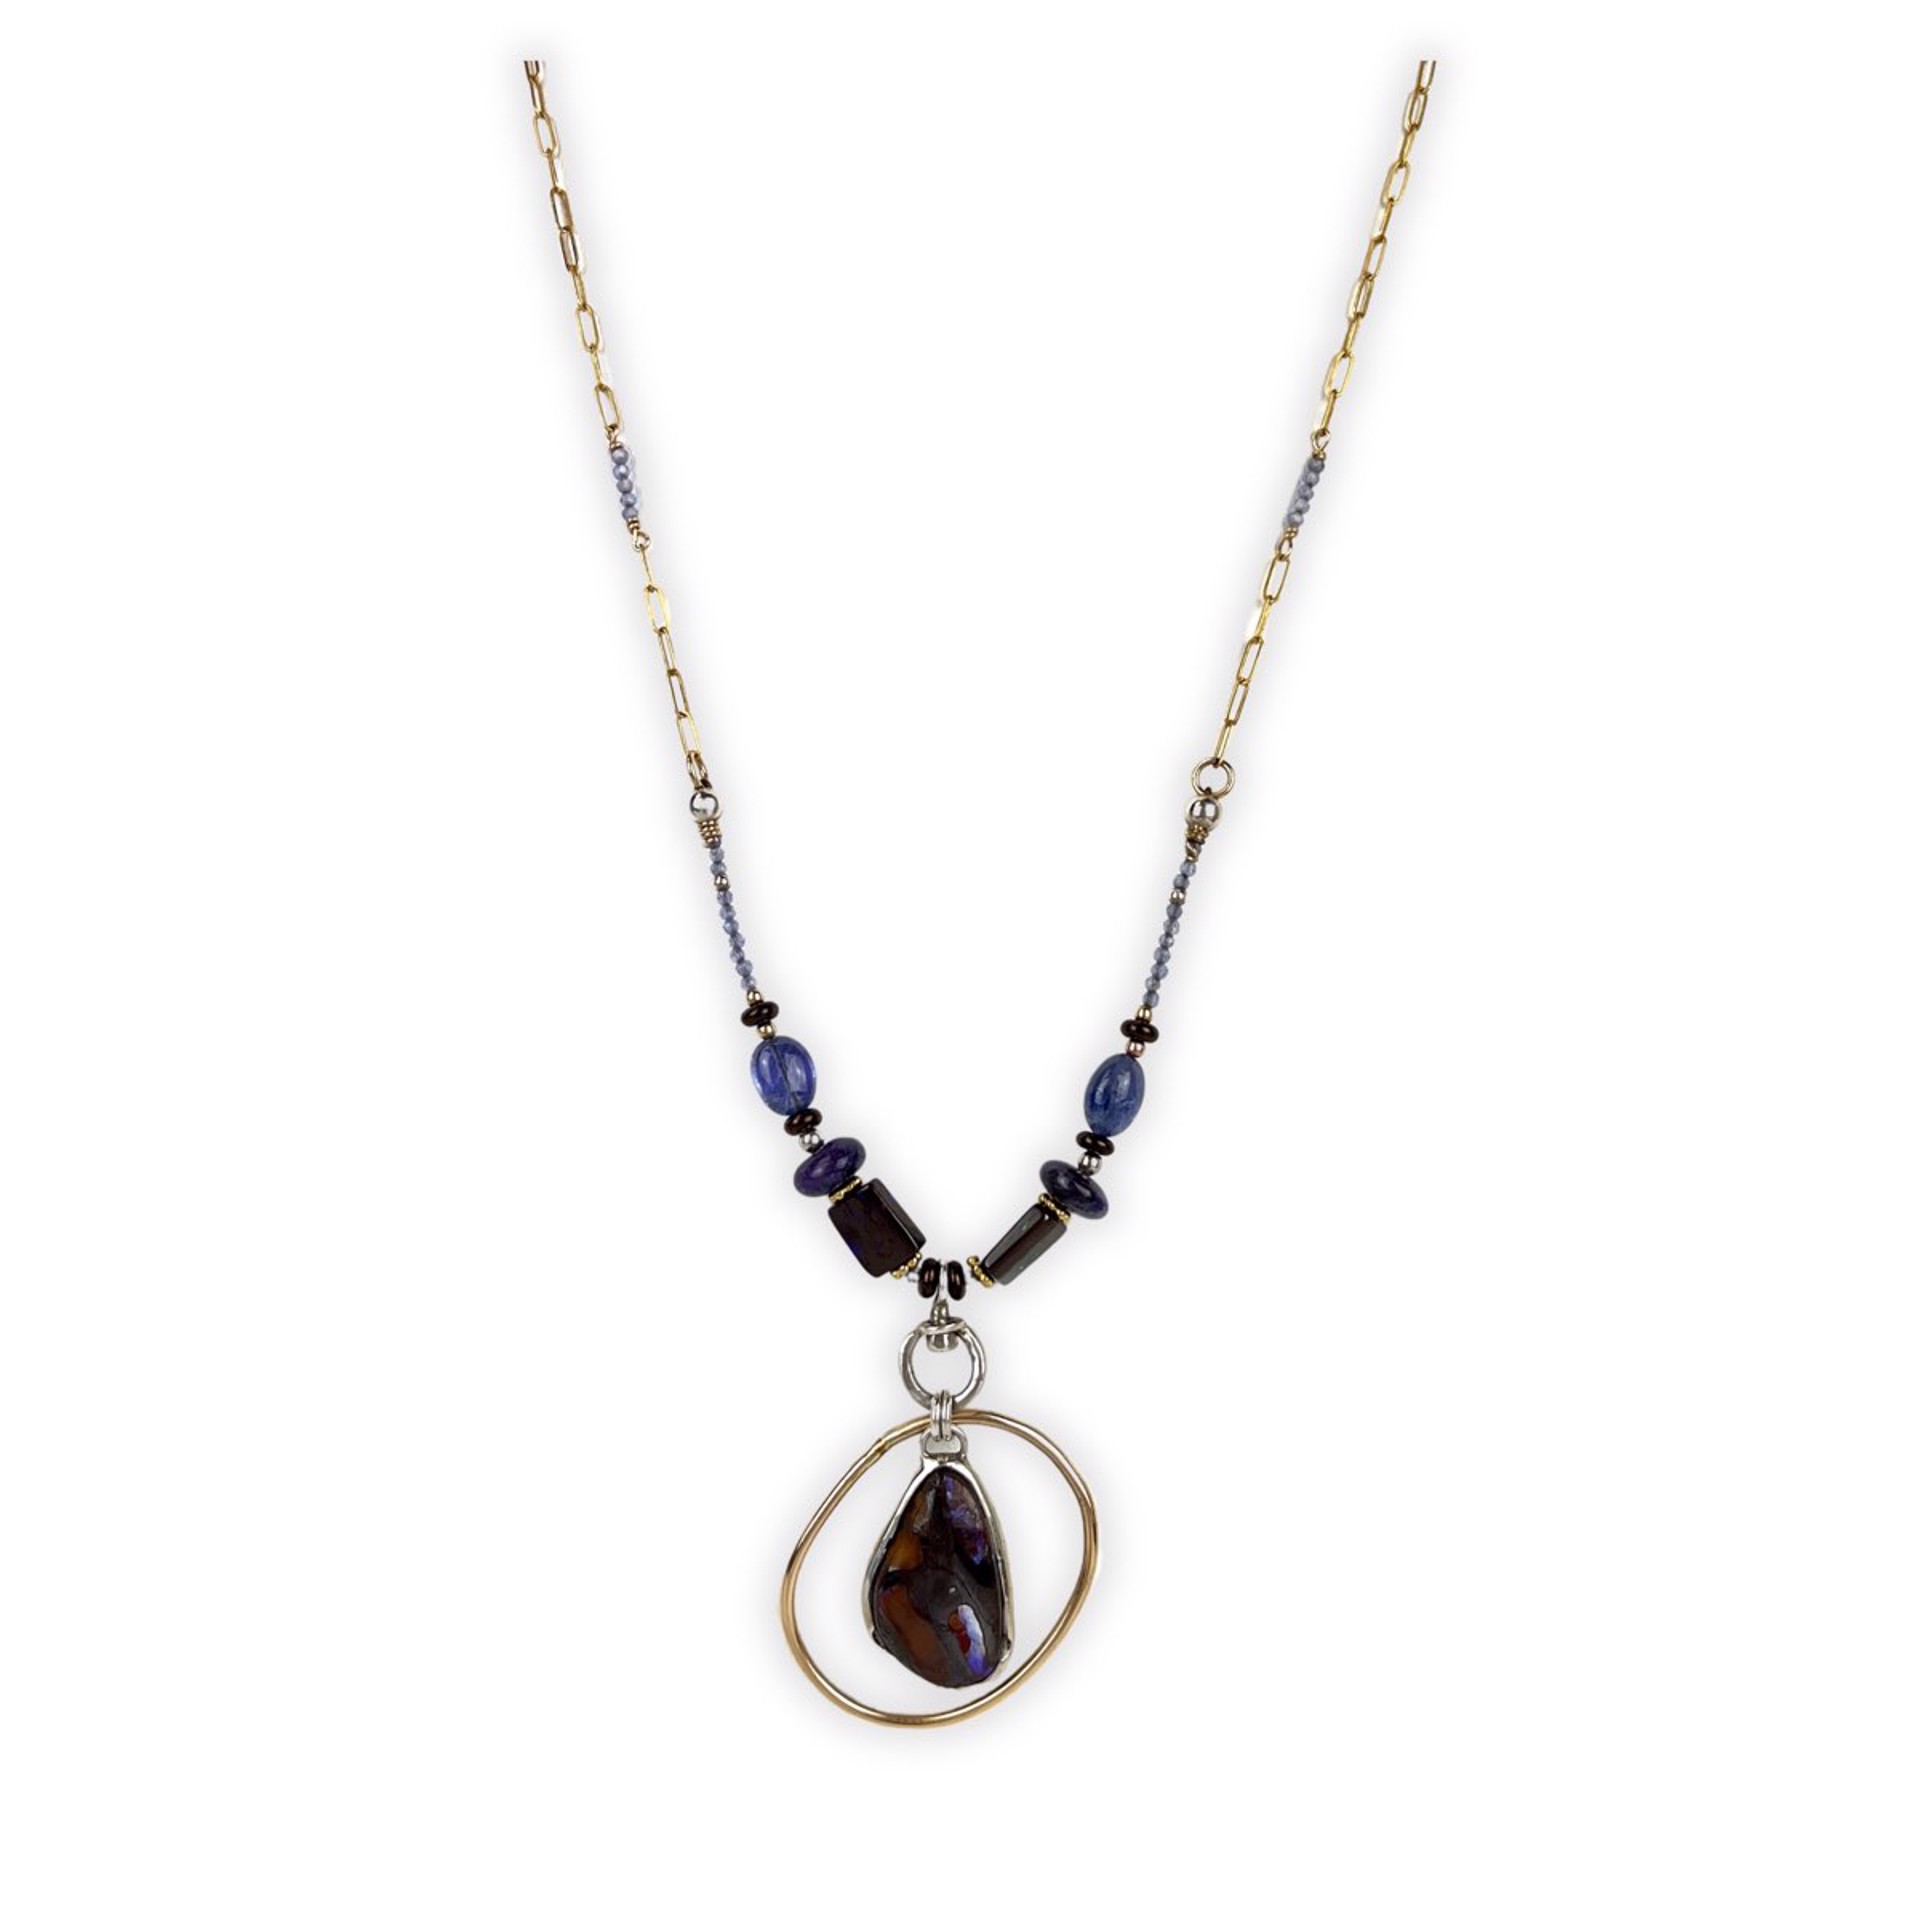 Boulder Opal, Tanzanite, Sugilite, 14KGF and Sterling Silver Hand-Fabricated Swivel Necklace by Nola Smodic